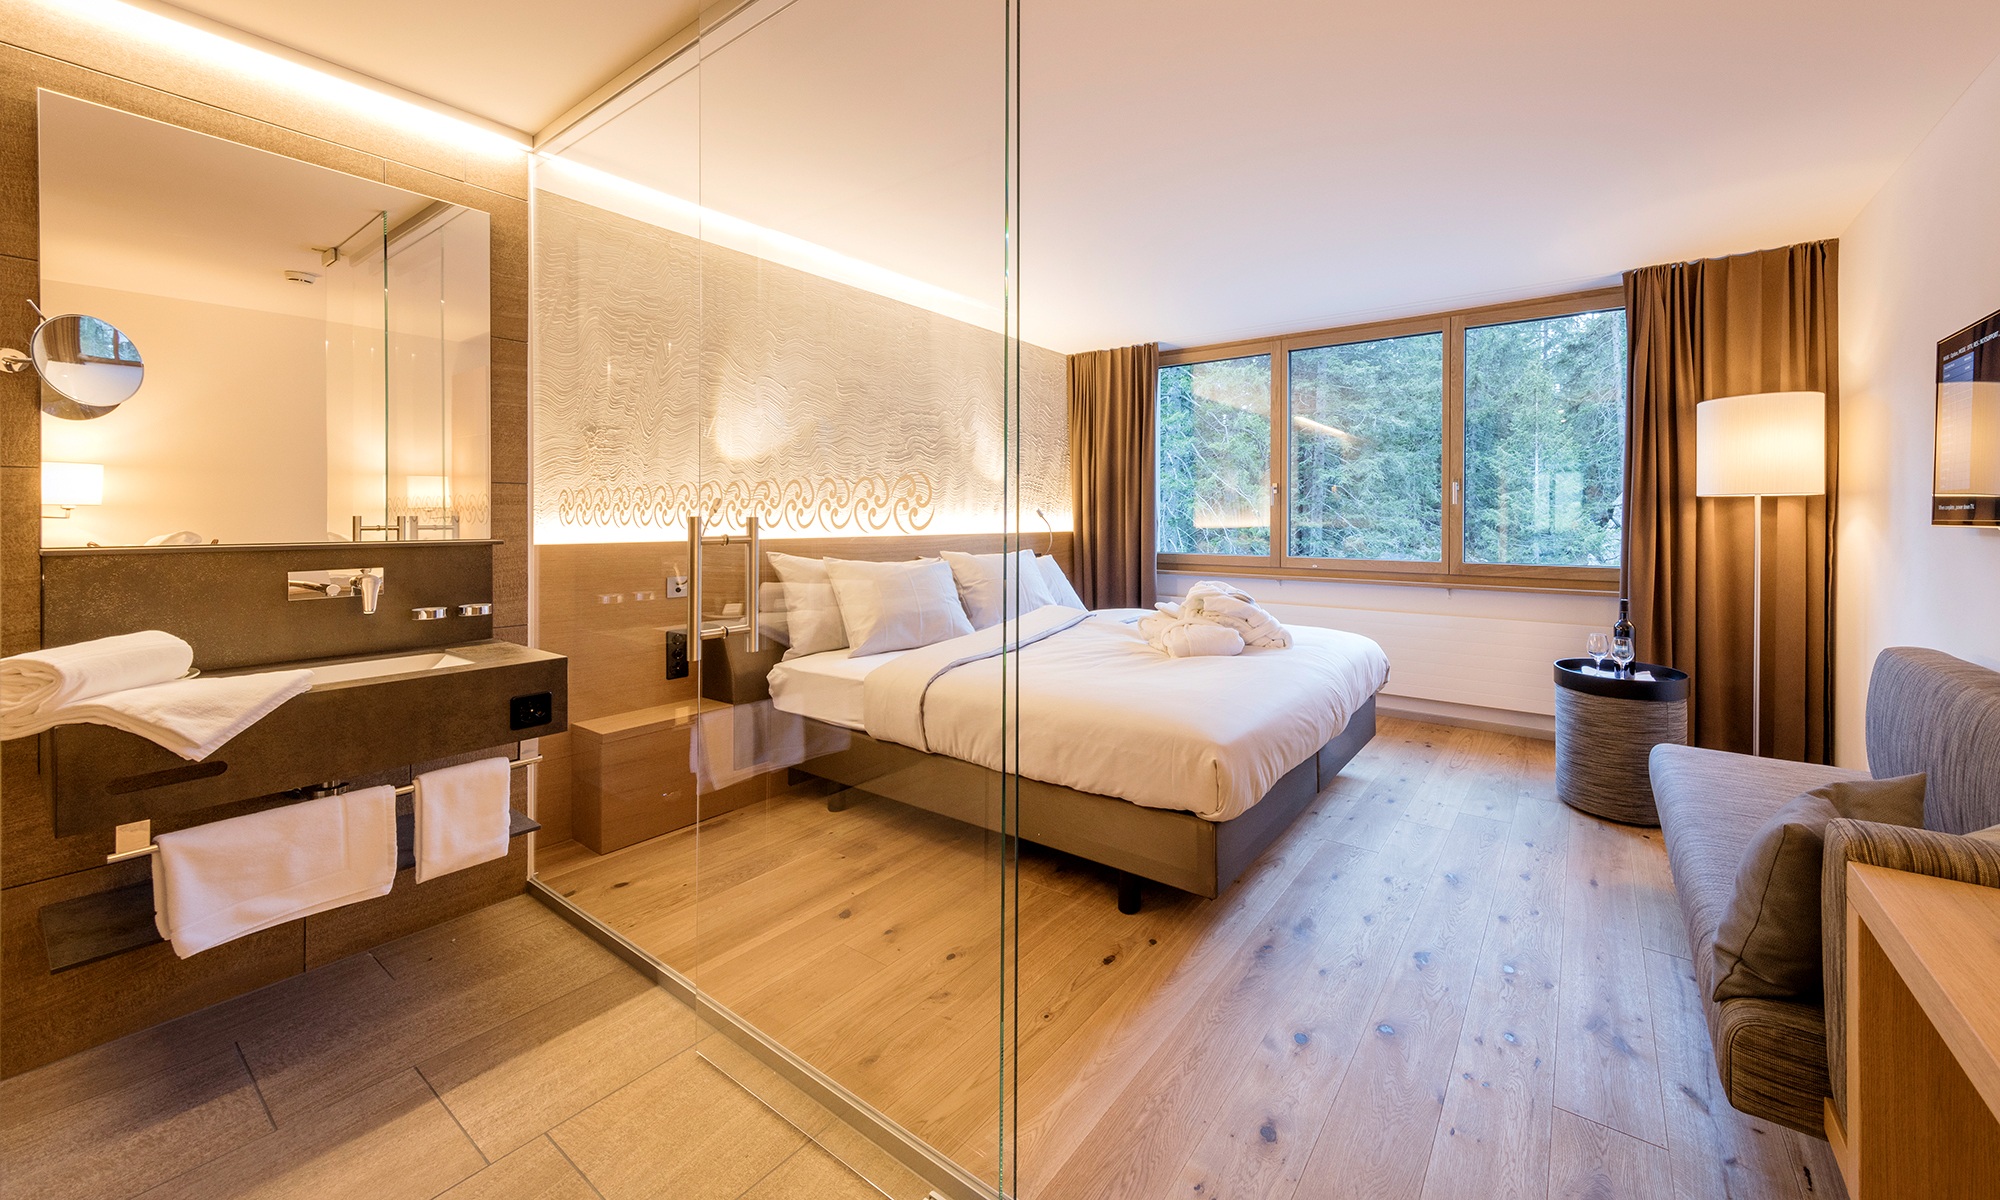 A glazed door separates the spacious bedroom from the bathroom. The room is furnished to a high standard and is bathed in light thanks to the large window.